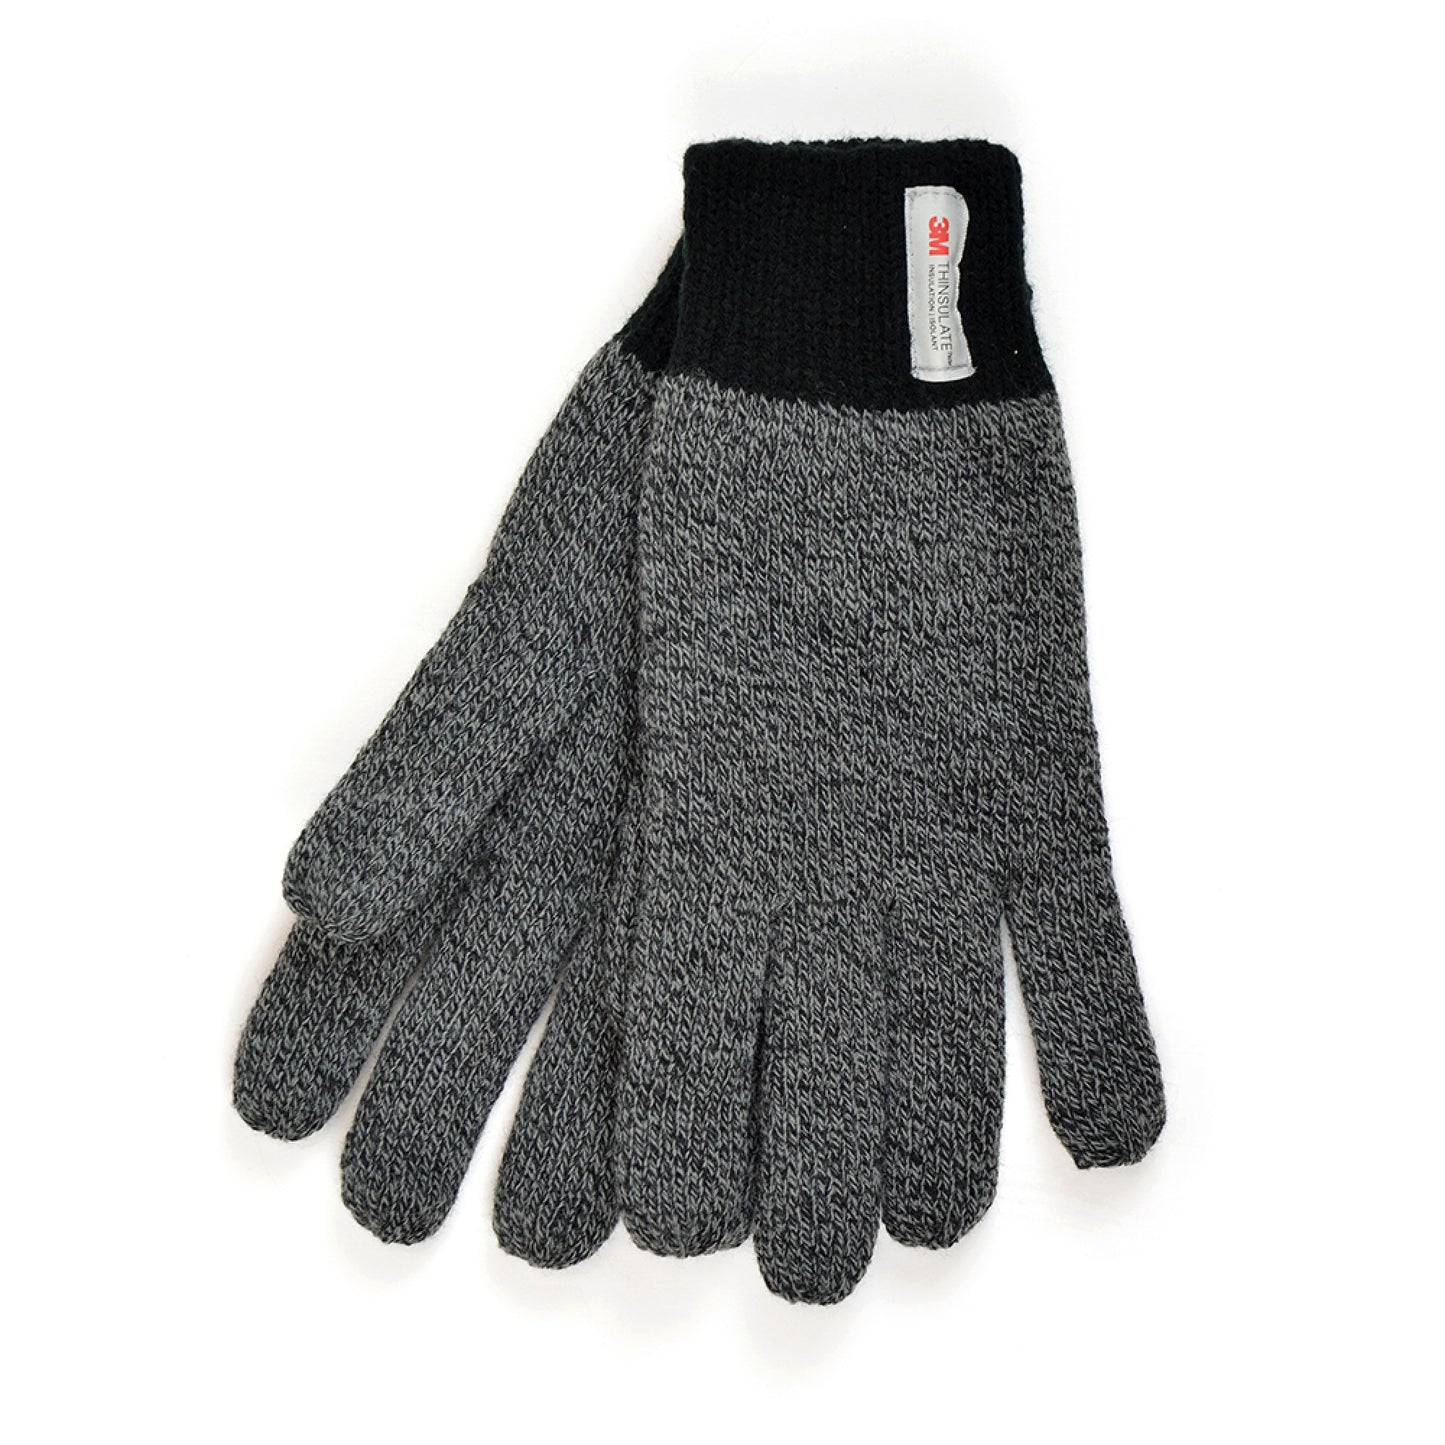 Mens Thinsulate Hat & Gloves Set - Chunky Knit Thermal Cold Weather Set